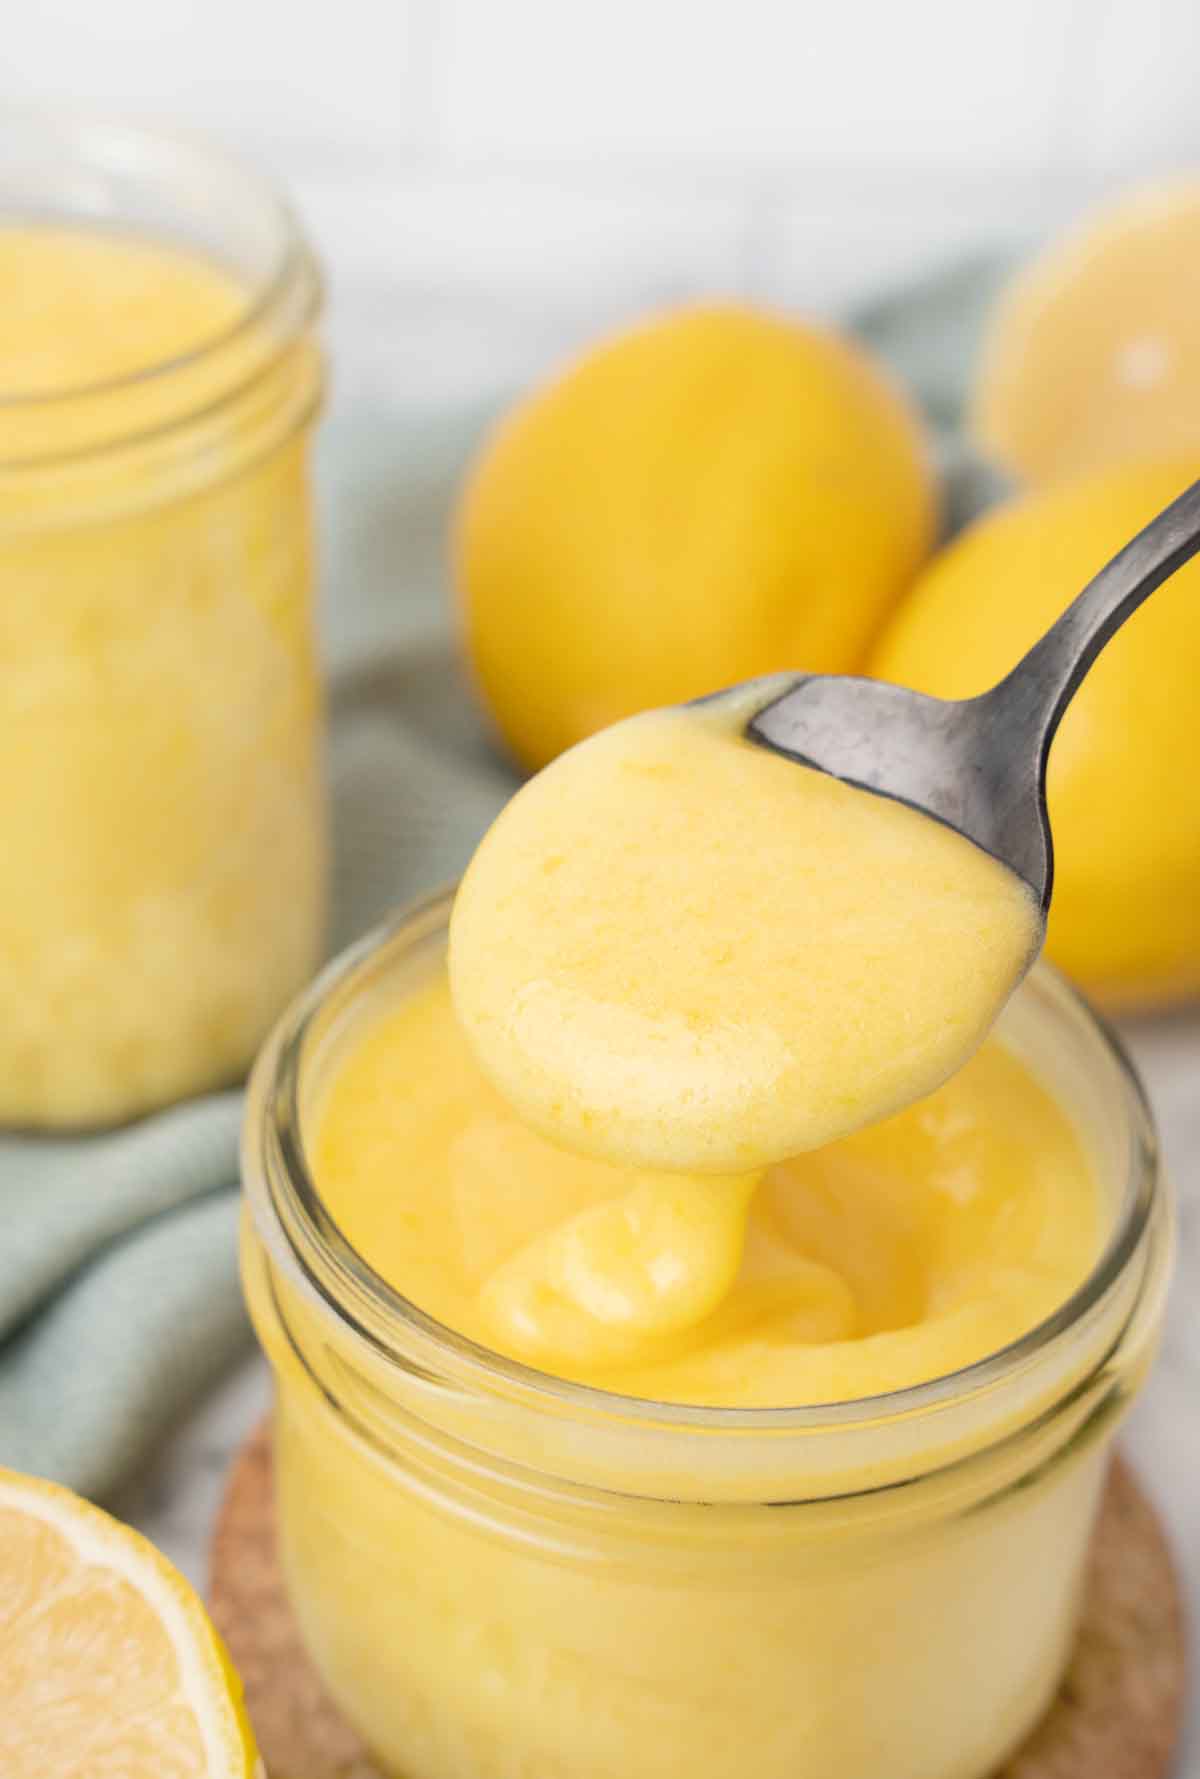 spoon in a jar of lemon curd, with lemons and another jar in the background.